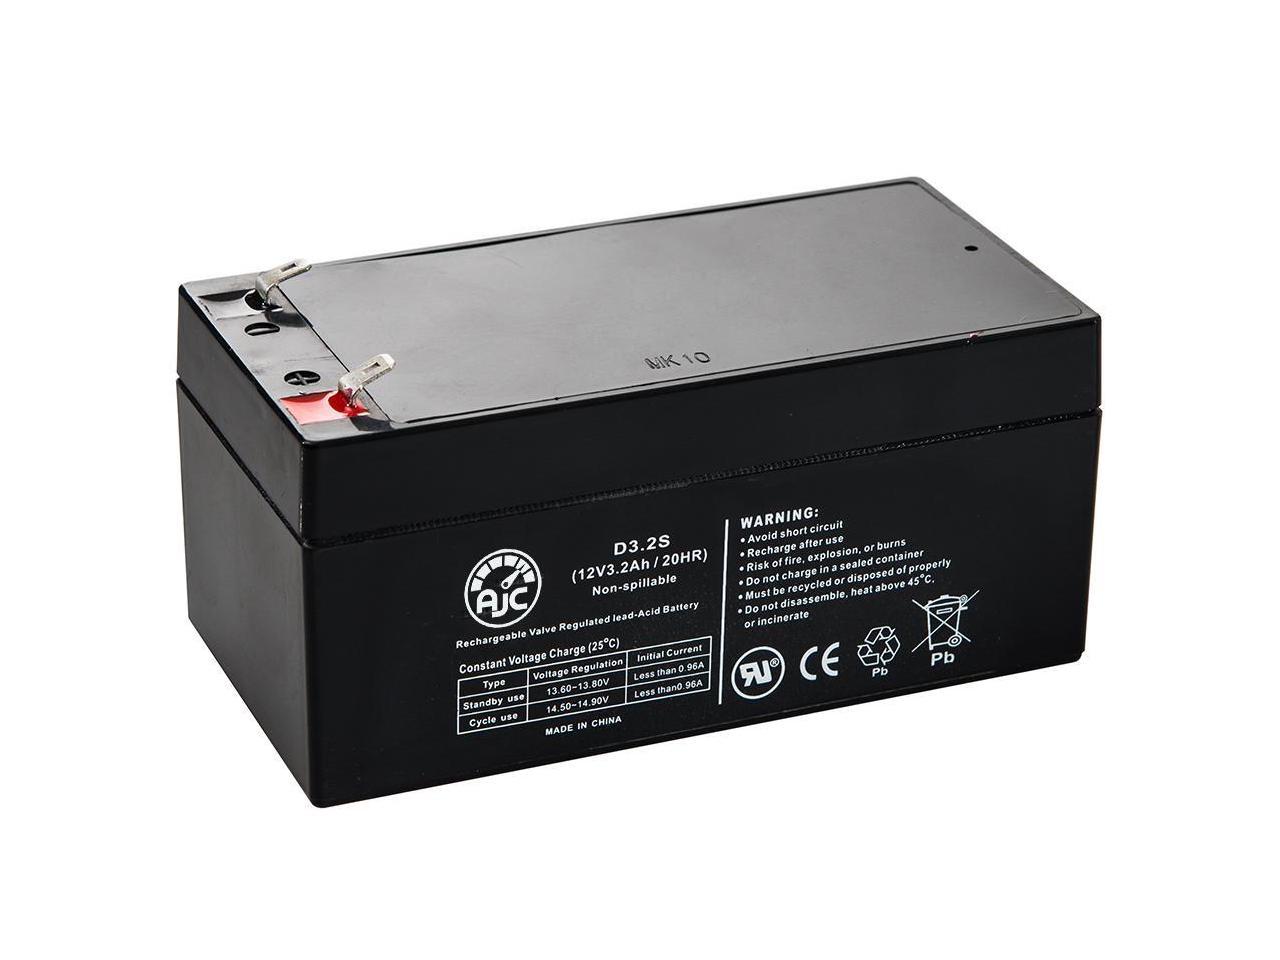 This is an AJC Brand Replacement Computer Accessories CSR400 6V 12Ah UPS Battery 